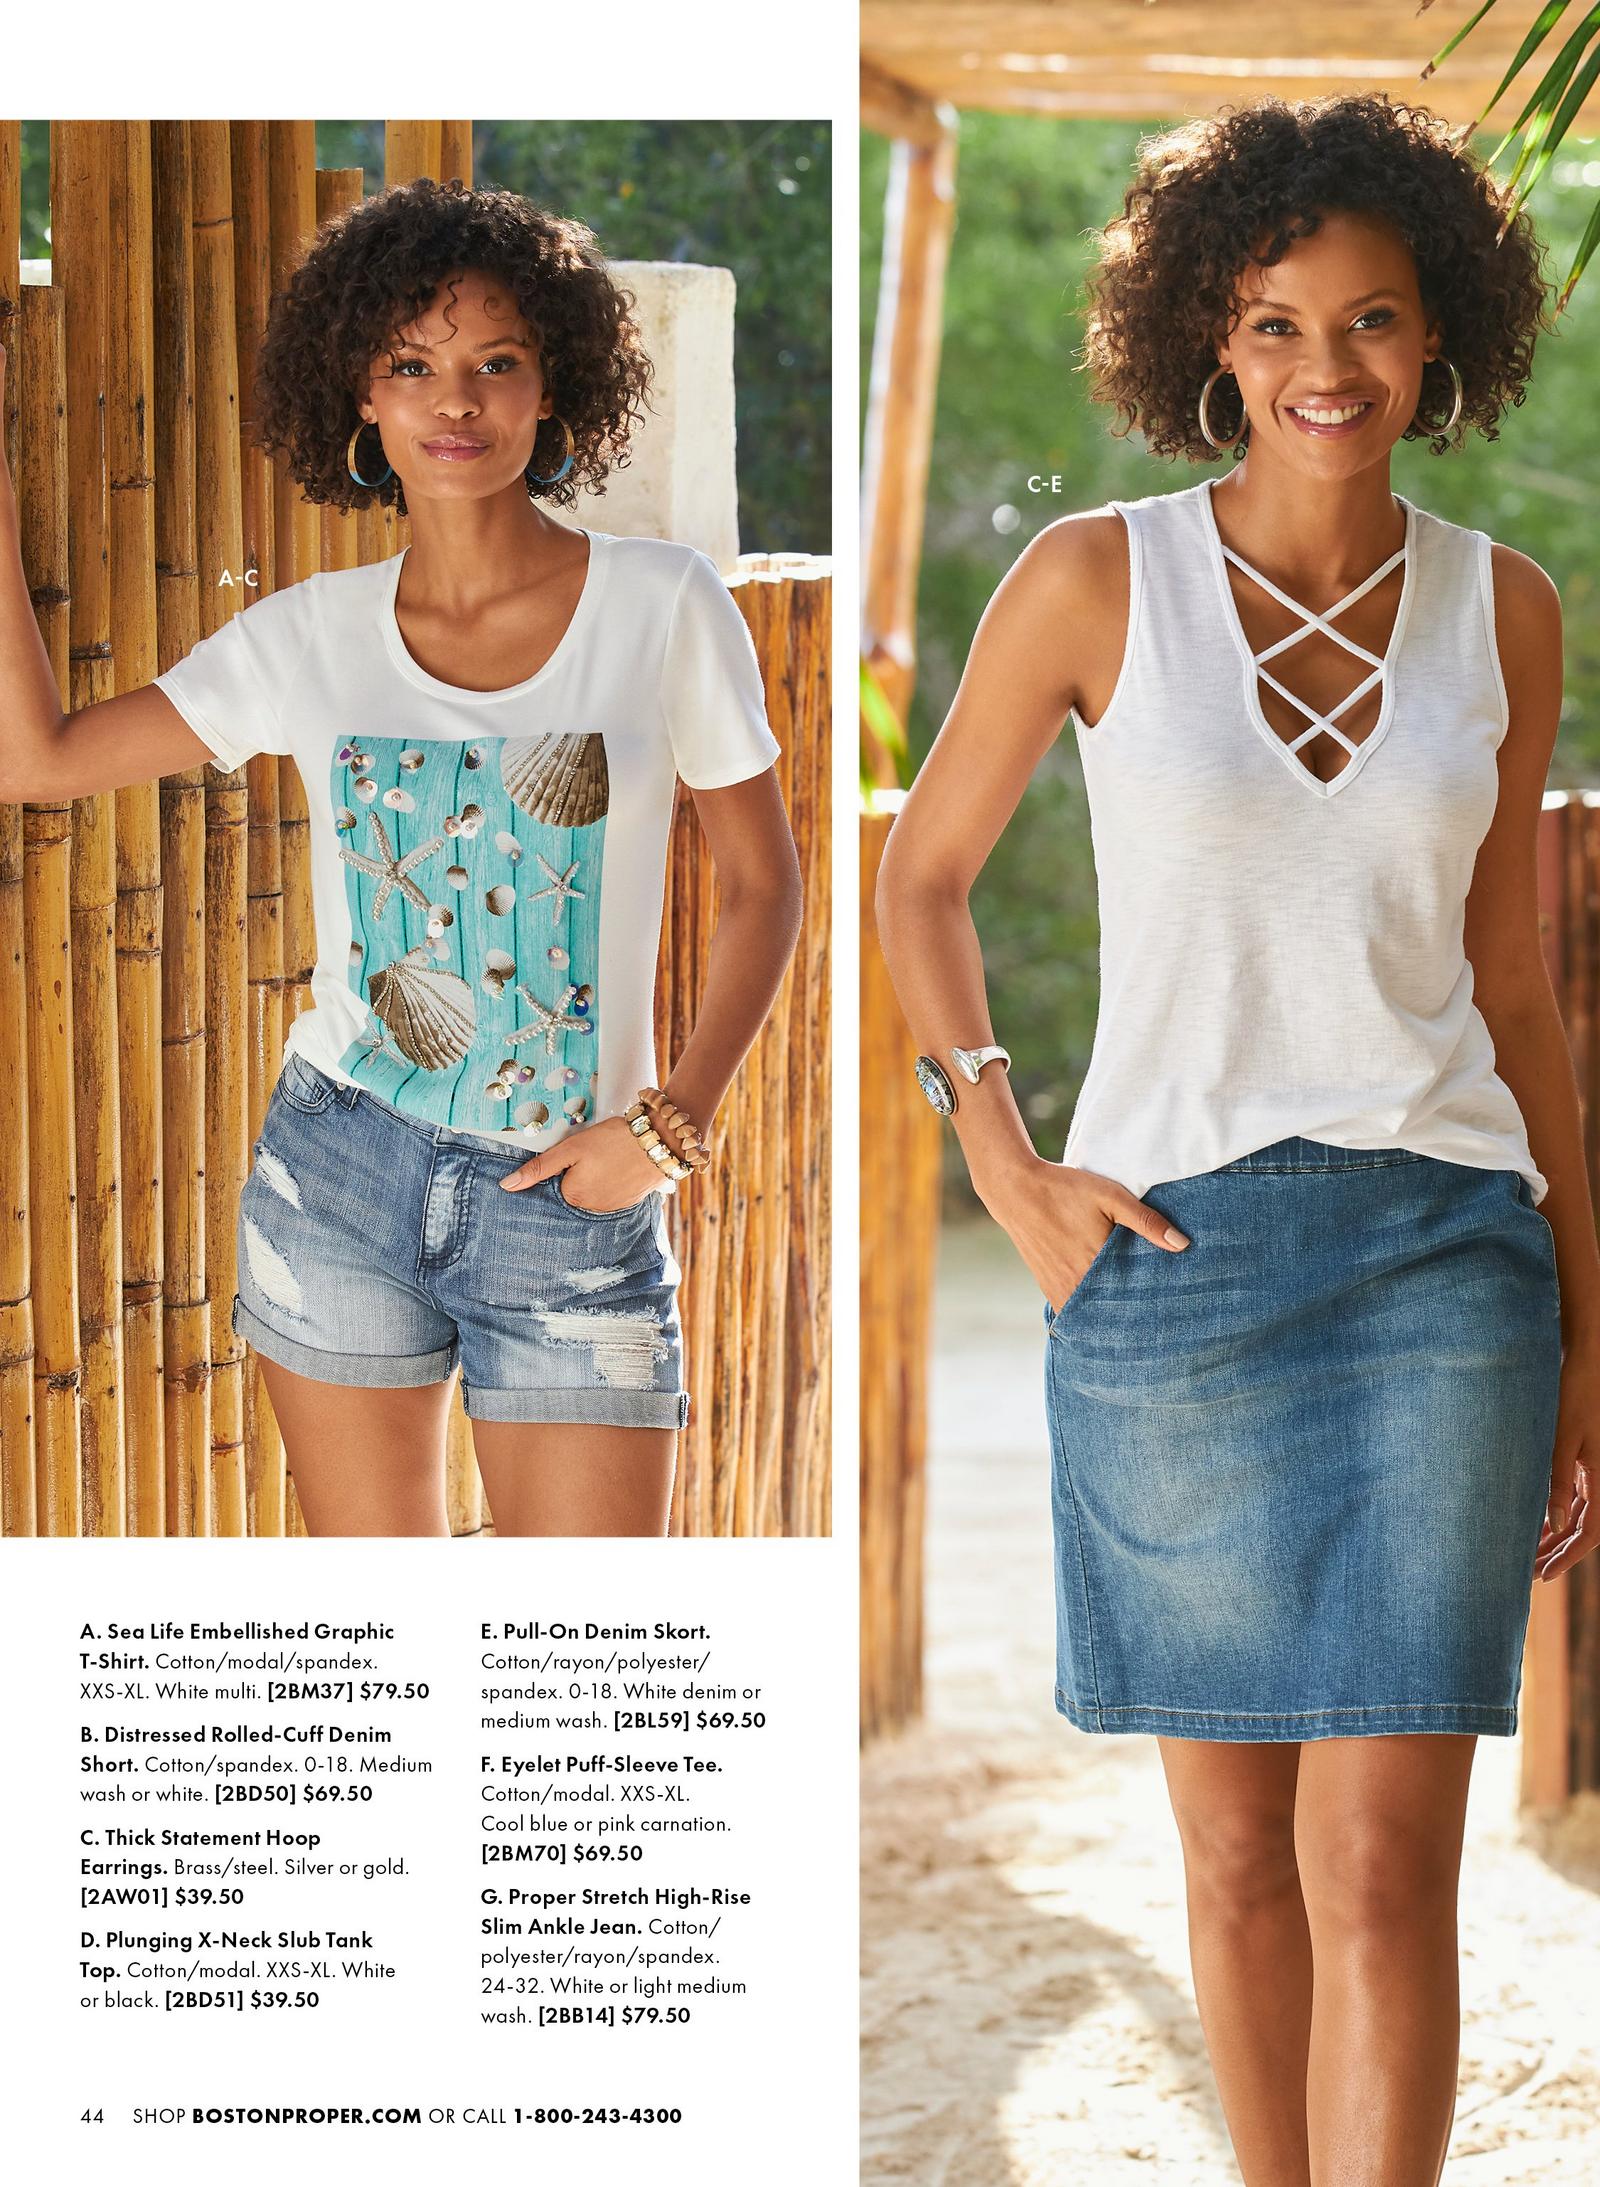 Model is wearing the Sea Life Embellished Graphic T-Shirt in white with blue wood and brown and white shells overtop, the distressed Rolled-Cuff Denim Short in medium wash and the Thick Statement Hoop Earrings in brass. Another model wears the Thick Statement Hoop Earrings in brass, the Plunging X-Neck Slub Tank Top in white and the Pull-On Denim Skort in medium wash.